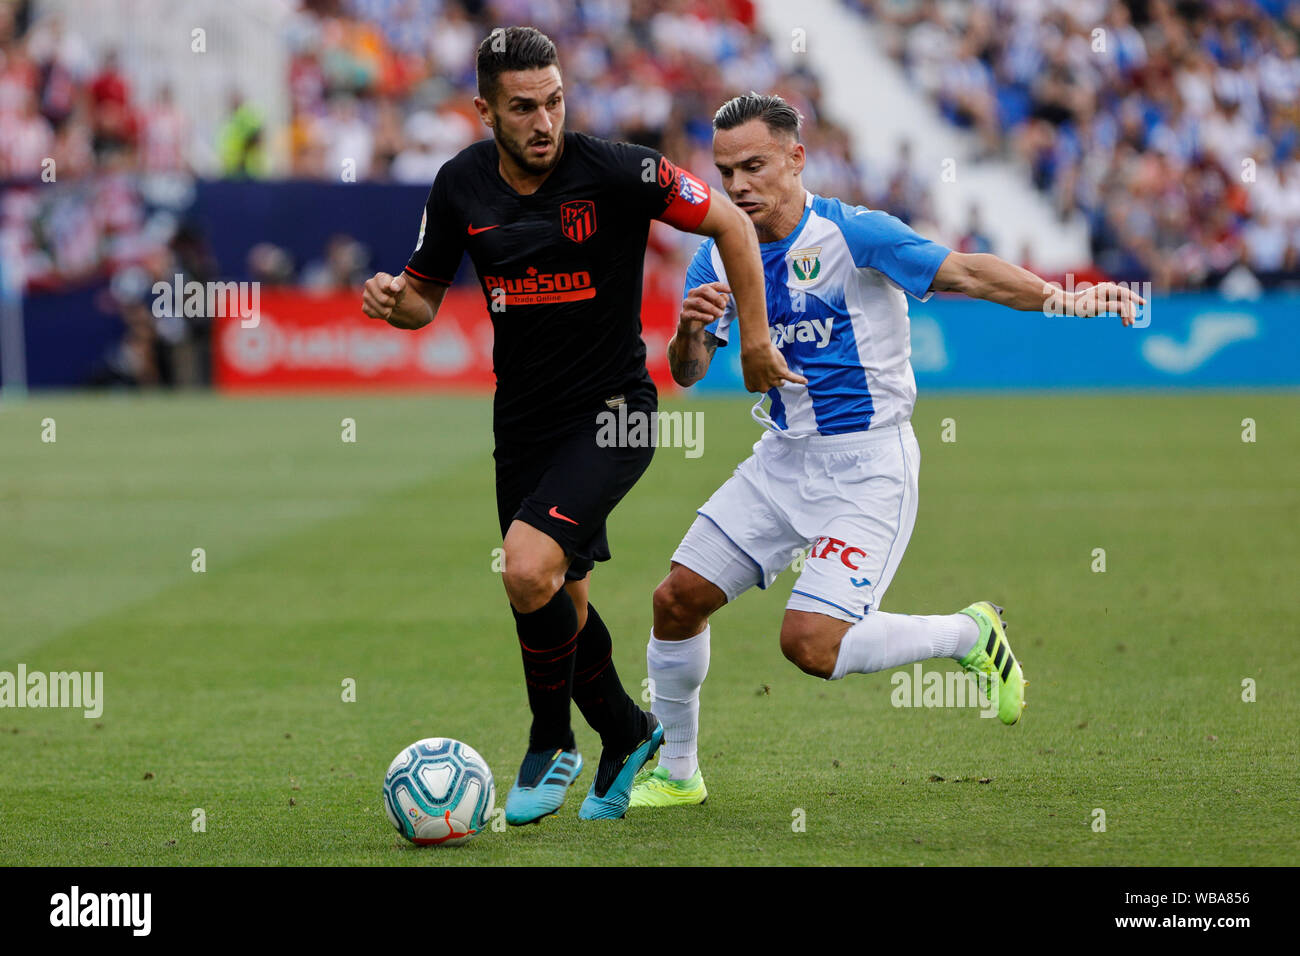 Madrid, Spain. 25th Aug, 2019. CD Leganes's Roque Mesa and Atletico de Madrid's Jorge Resurreccion Koke are seen in action during the La Liga football match between CD Leganes and Atletico de Madrid at Butarque Stadium in Madrid.(Final score; CD Leganes 0:1 Atletico de Madrid) Credit: SOPA Images Limited/Alamy Live News Stock Photo